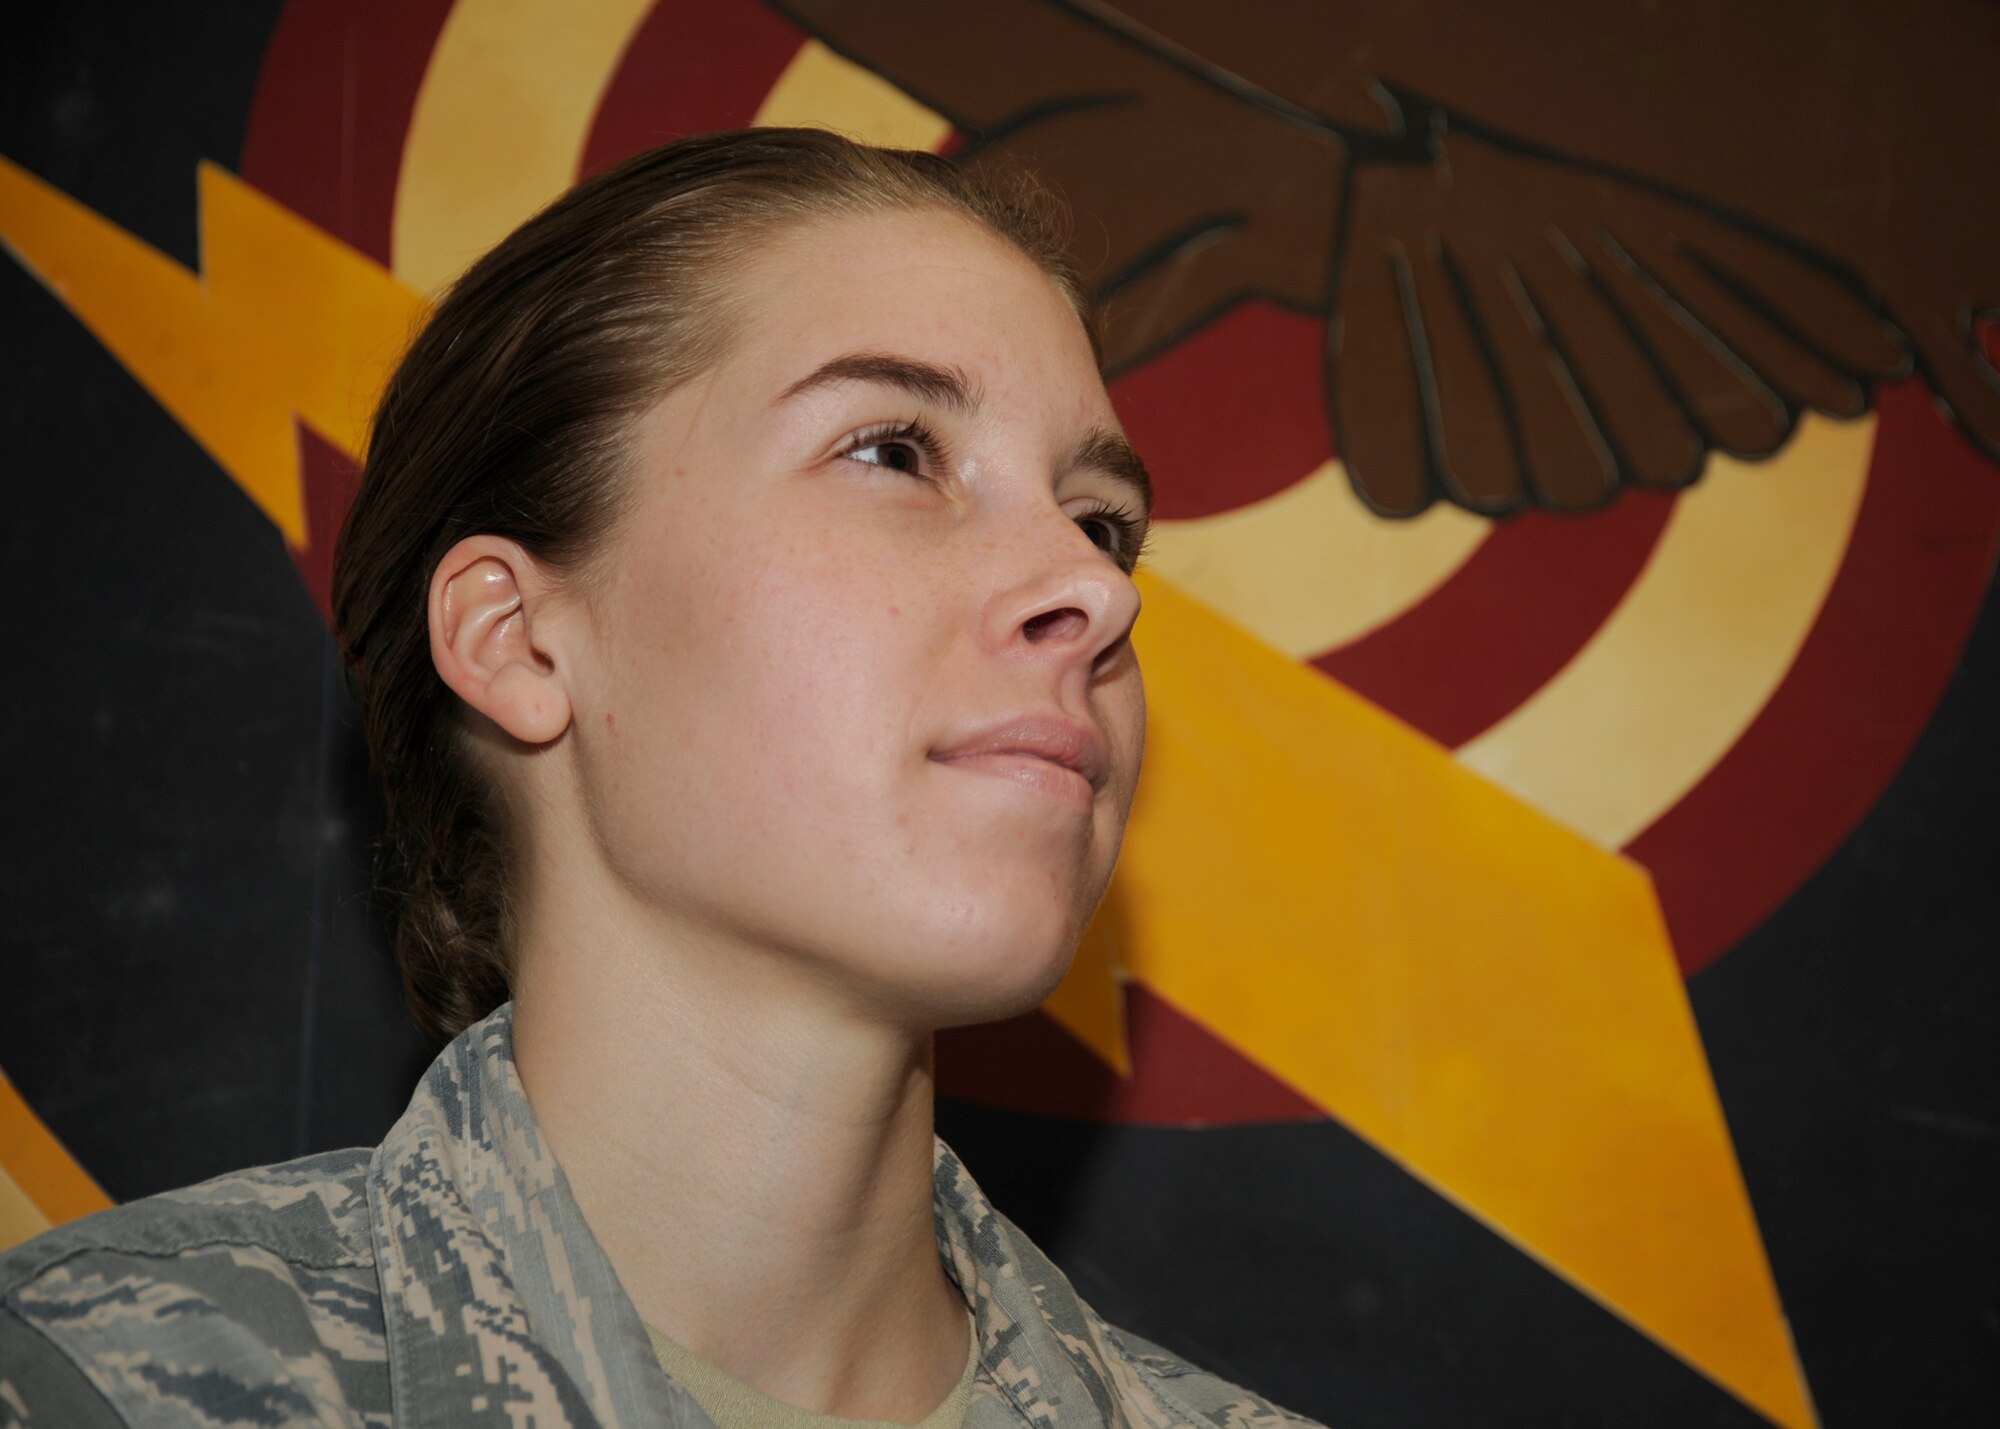 Airman 1st Class Rachel Jones from the 81st Range Control Squadron stands for a photo in front of the 81st’s squadron patch at Tyndall Air Force Base, Fla., July 27, 2016. Jones was selected by her leadership as an outstanding performer. (U.S. Air Force photo by Senior Airman Solomon Cook/Released)